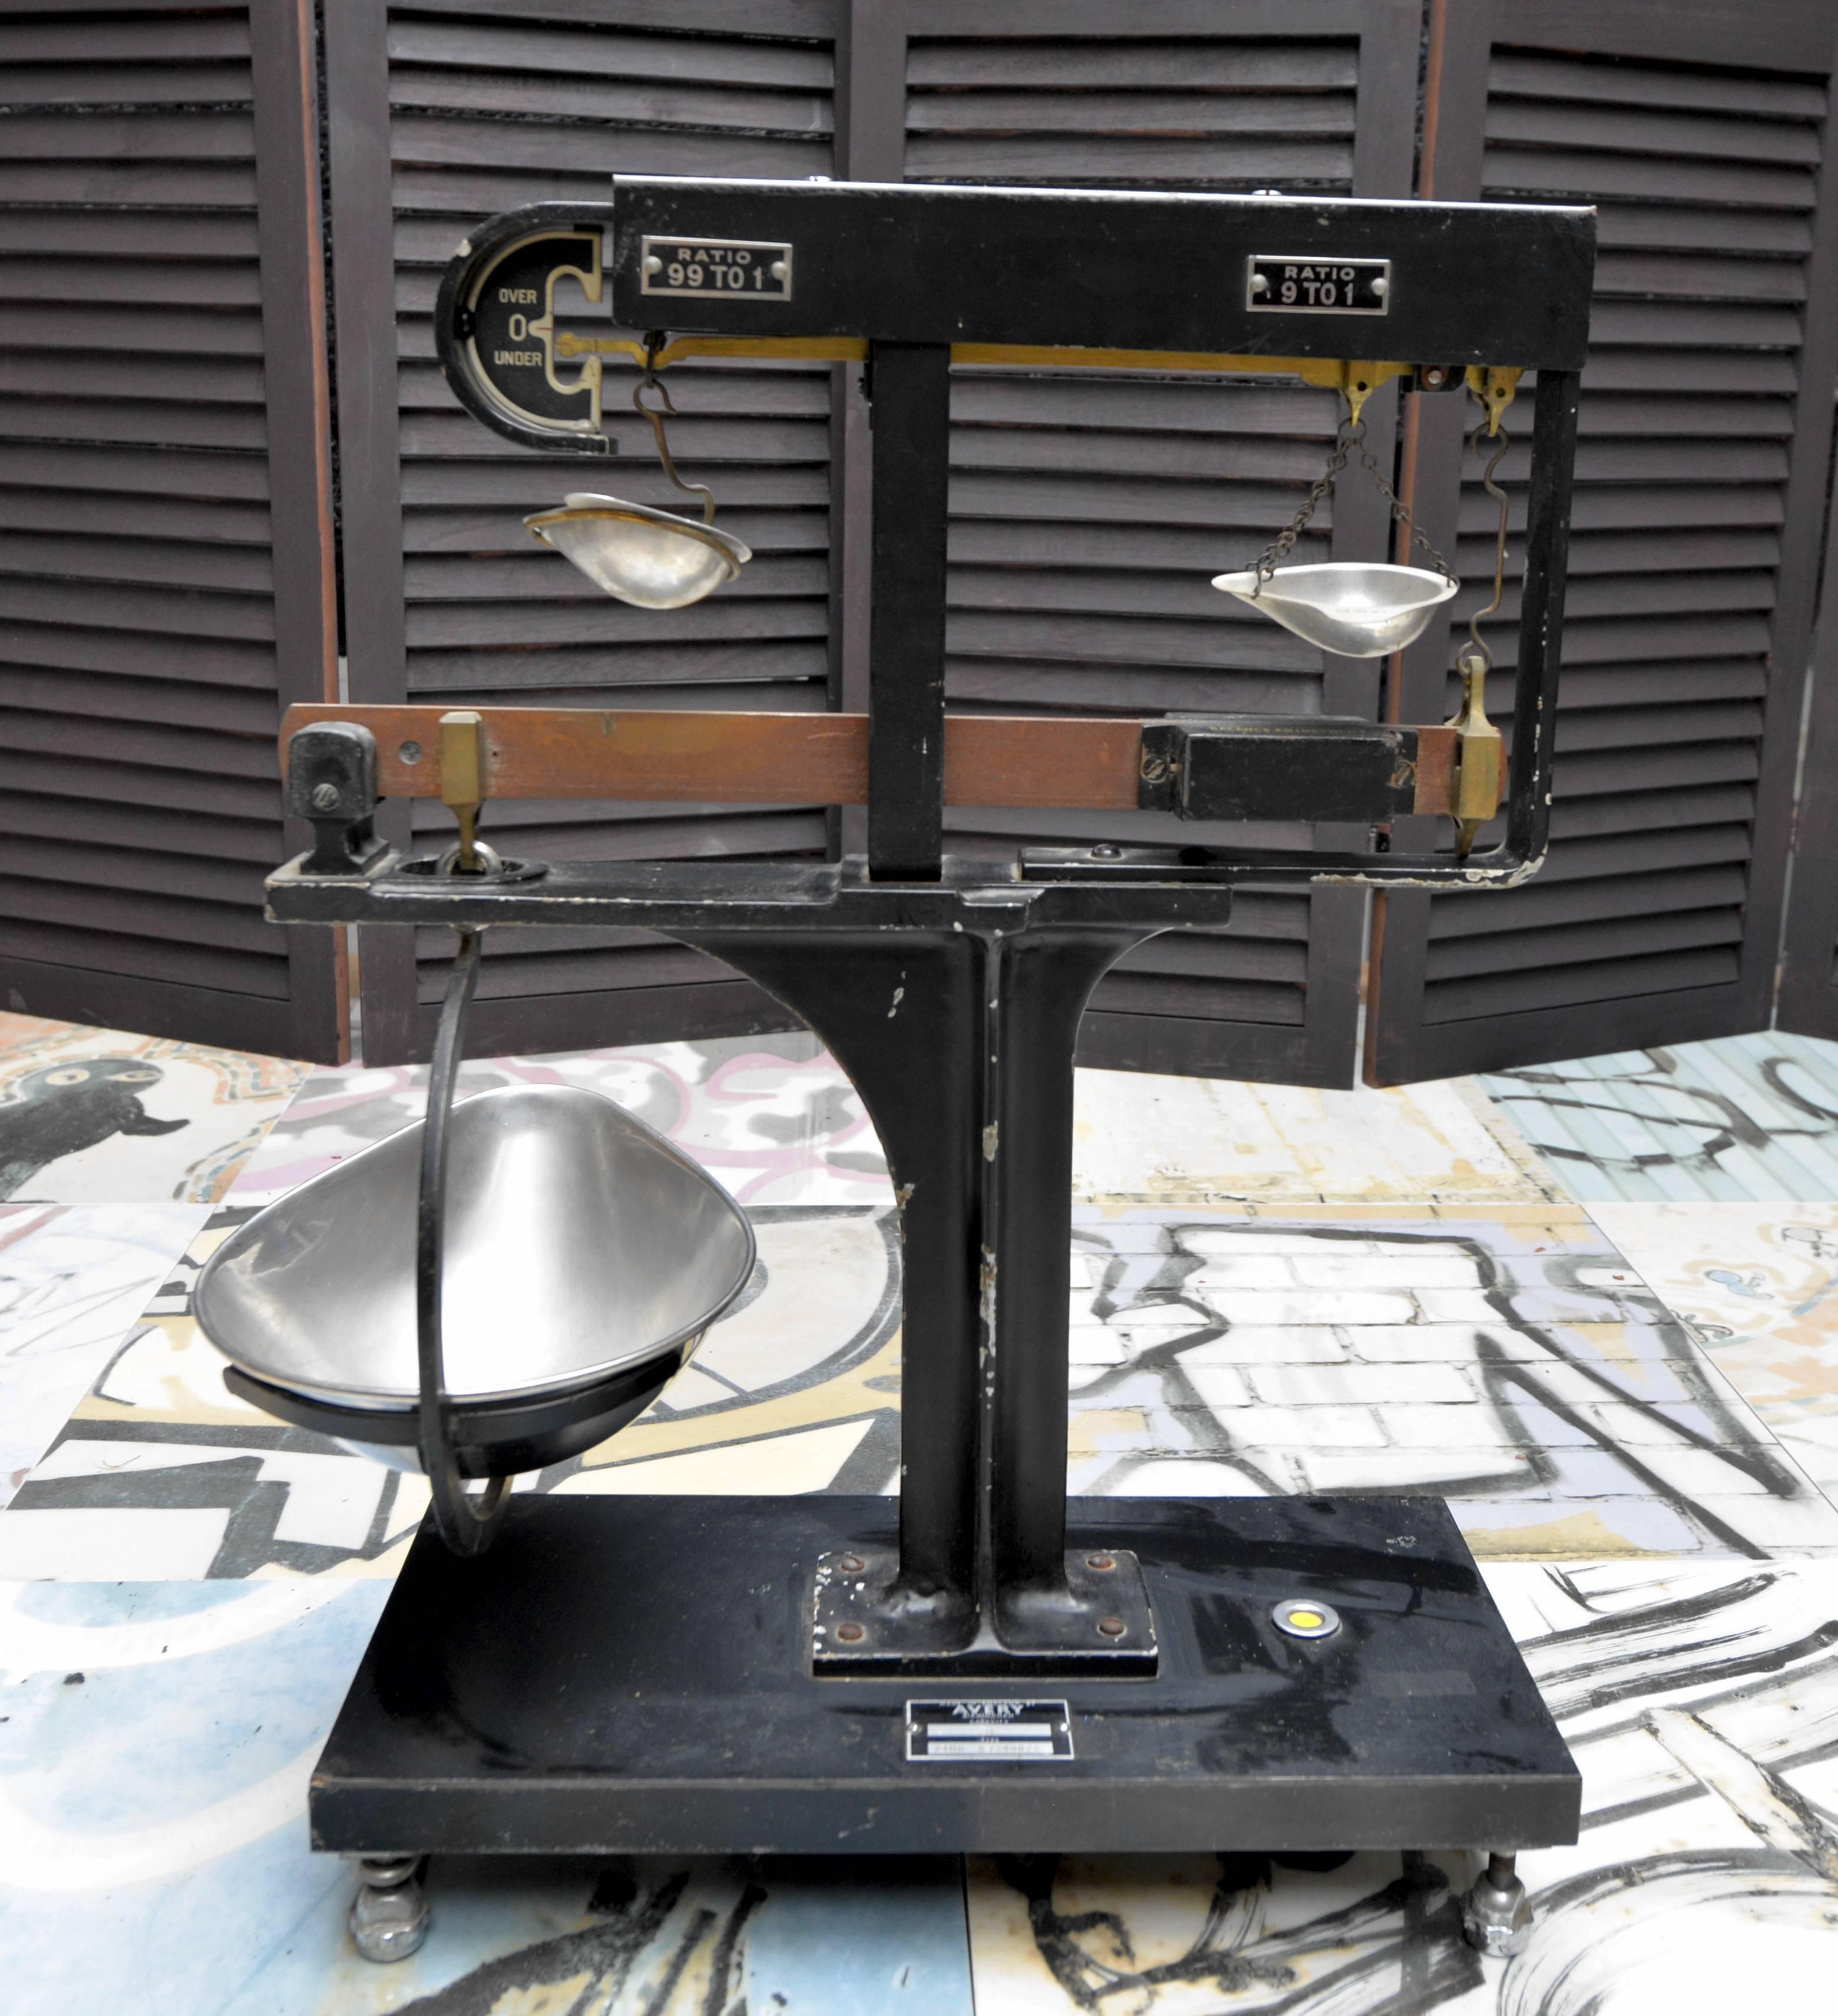 1950s British made Avery scale for precious metals and stones.